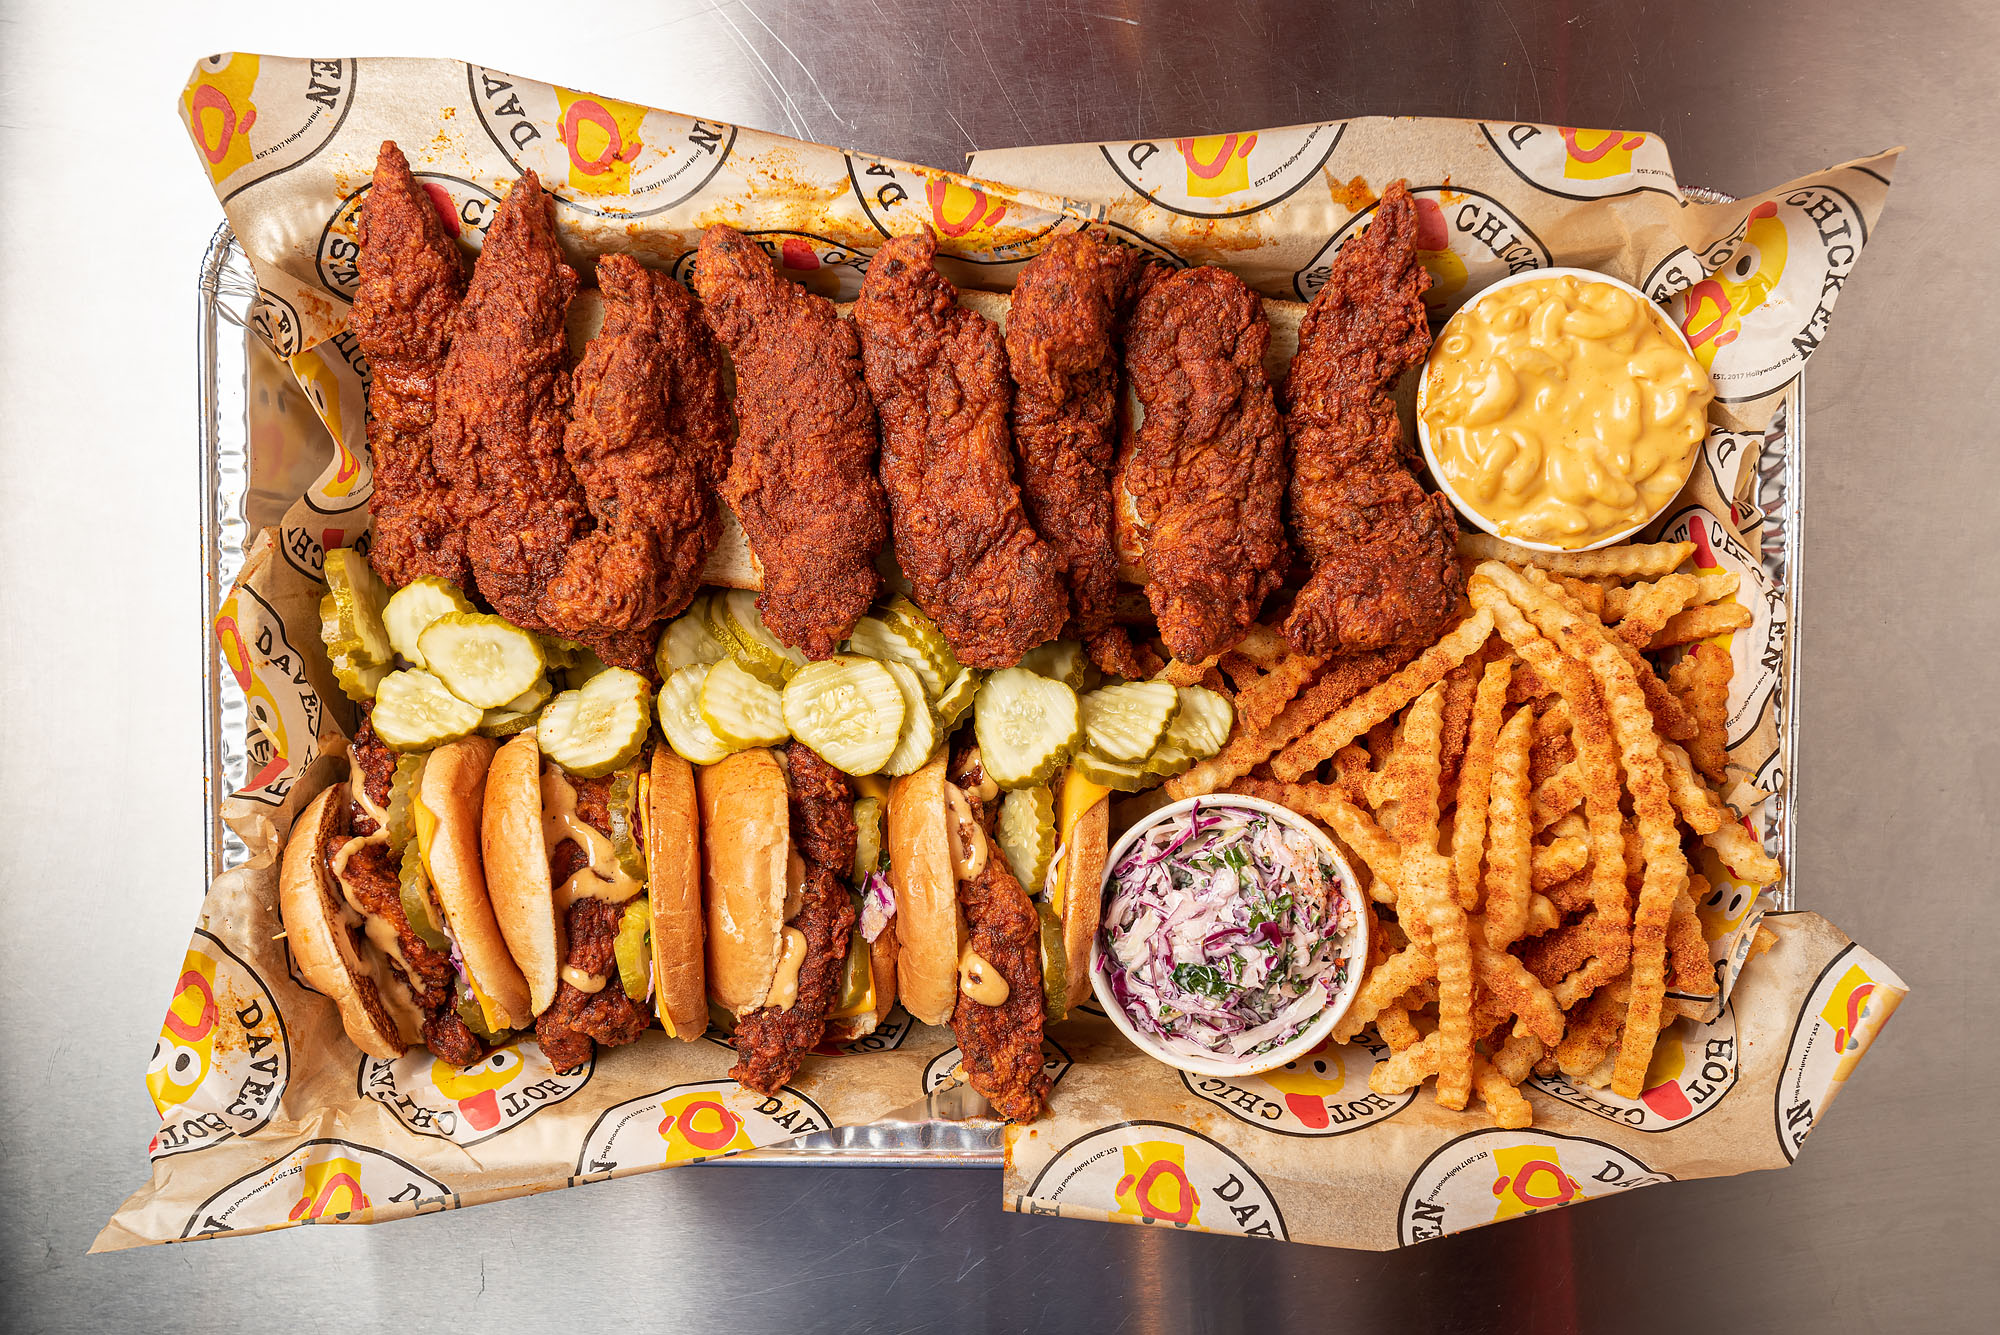 A lineup of chicken tenders and sandwiches with fries and sides.